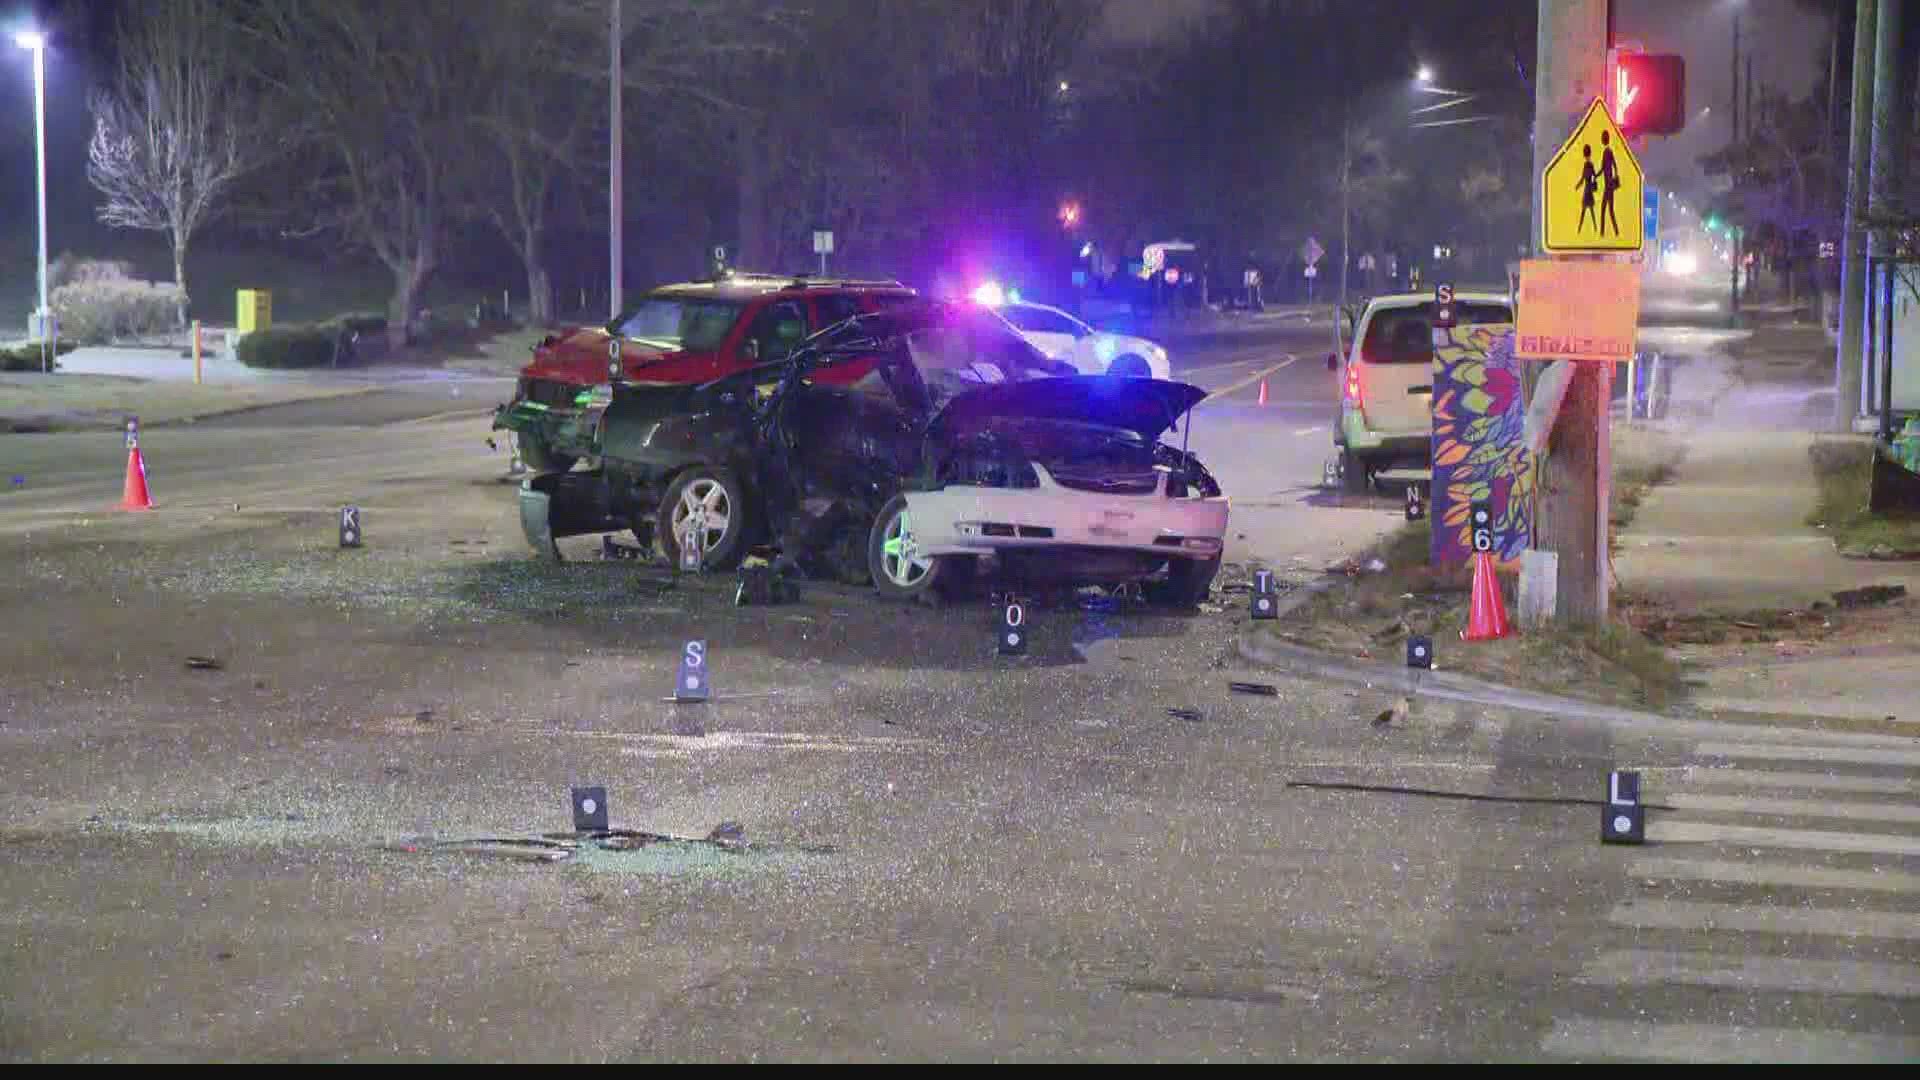 Two deadly crashes occurred Sunday morning on opposite sides of Indianapolis.